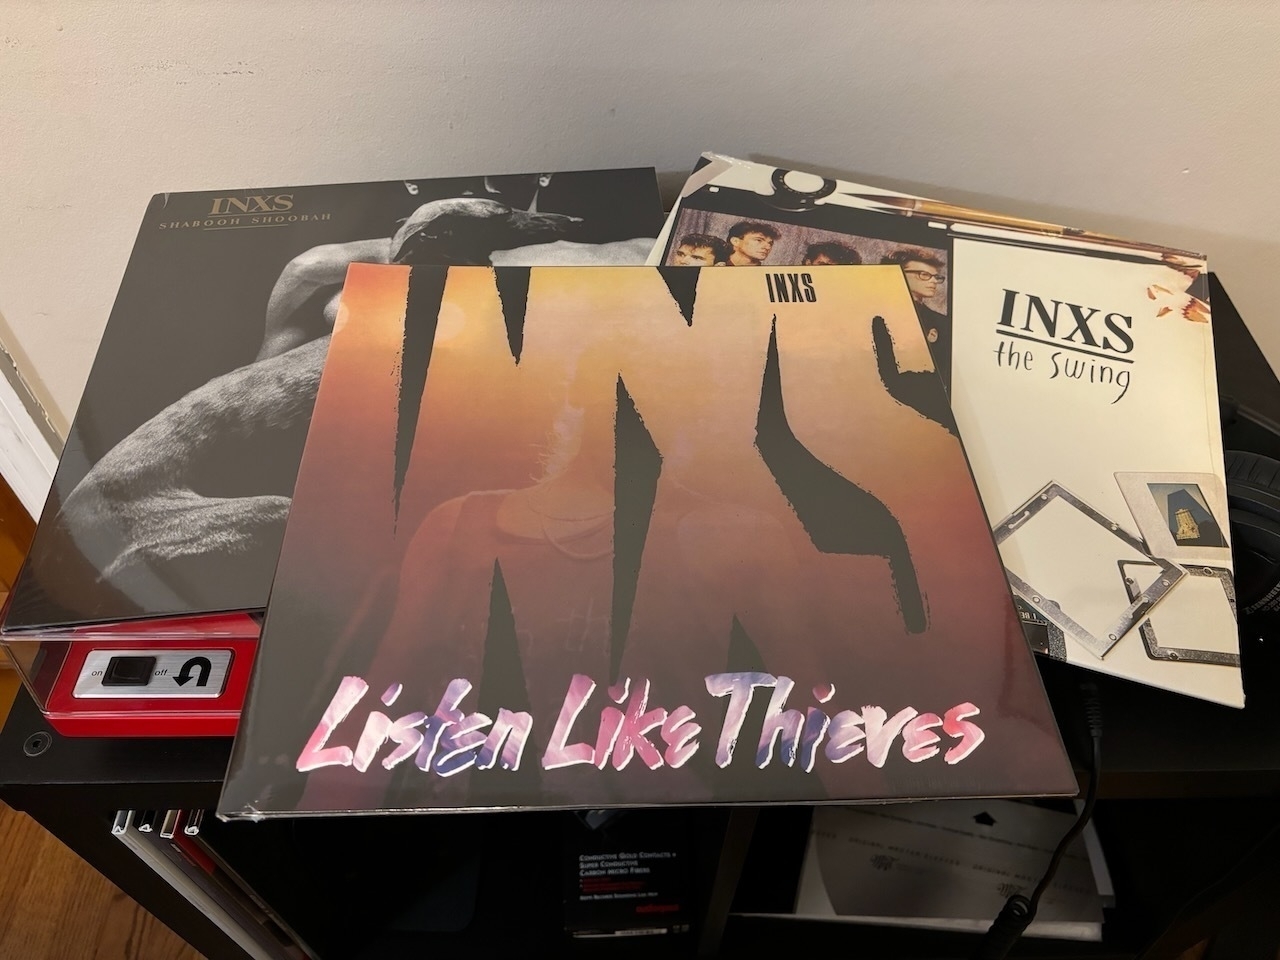 Auto-generated description: A collection of INXS vinyl records is arranged on a table.